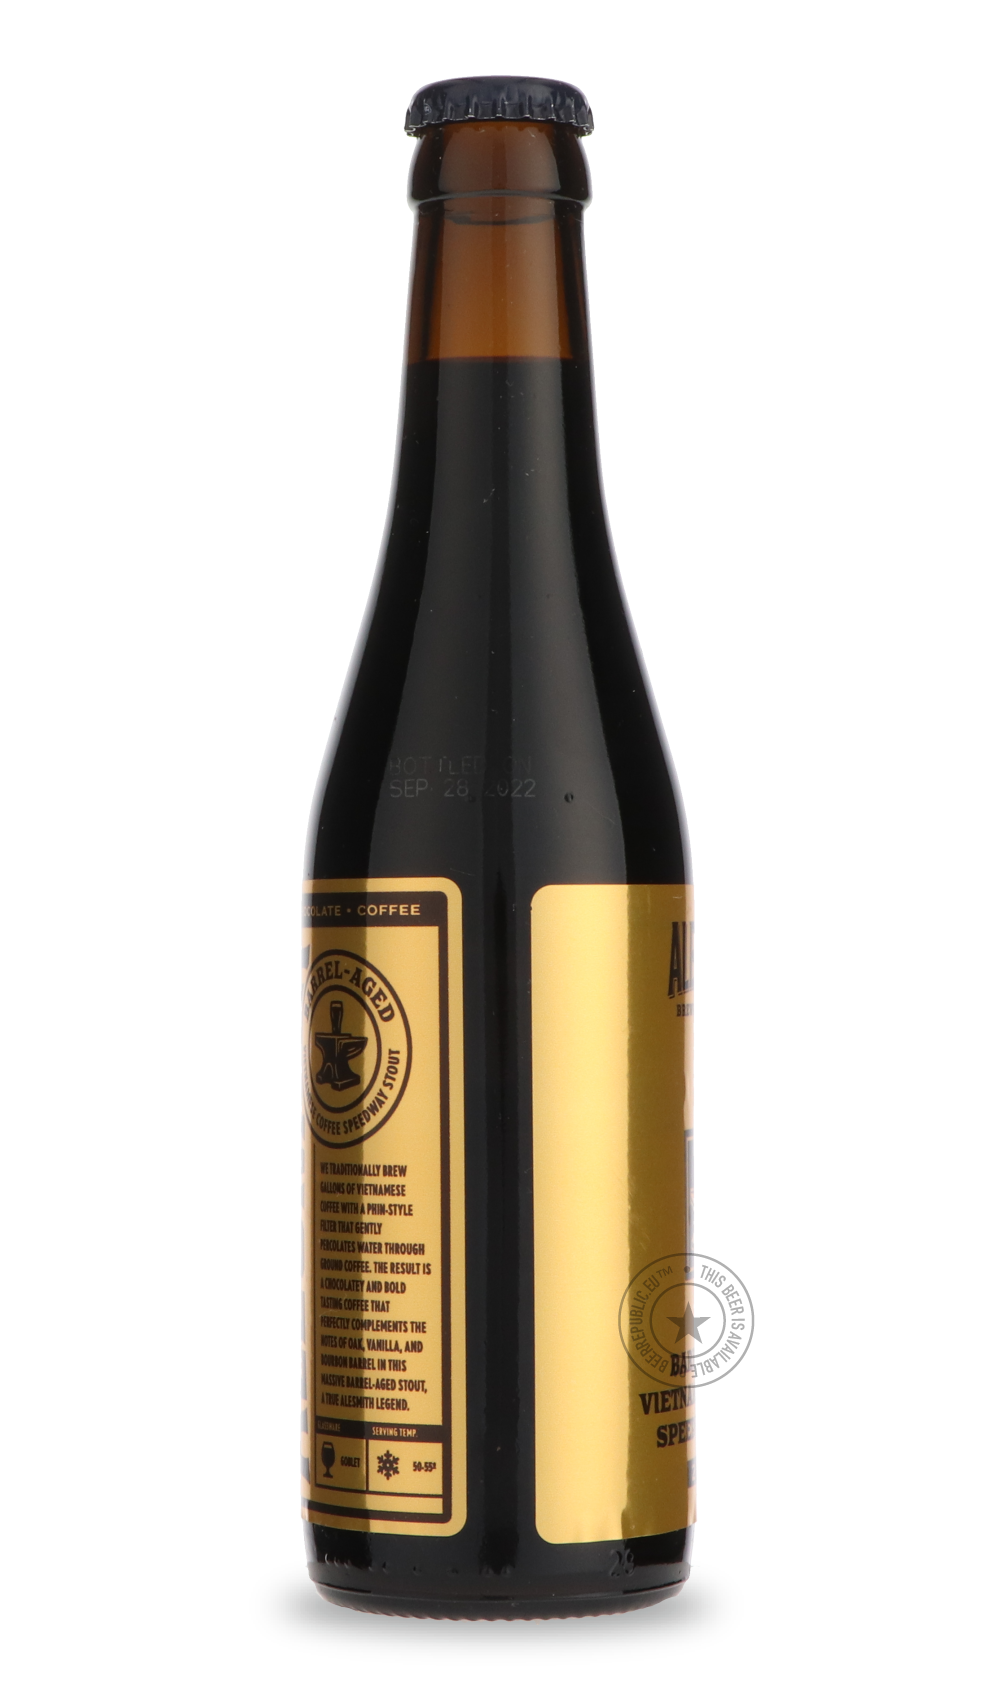 -AleSmith- Barrel-Aged Vietnamese Coffee Speedway Stout 2022-Stout & Porter- Only @ Beer Republic - The best online beer store for American & Canadian craft beer - Buy beer online from the USA and Canada - Bier online kopen - Amerikaans bier kopen - Craft beer store - Craft beer kopen - Amerikanisch bier kaufen - Bier online kaufen - Acheter biere online - IPA - Stout - Porter - New England IPA - Hazy IPA - Imperial Stout - Barrel Aged - Barrel Aged Imperial Stout - Brown - Dark beer - Blond - Blonde - Pils